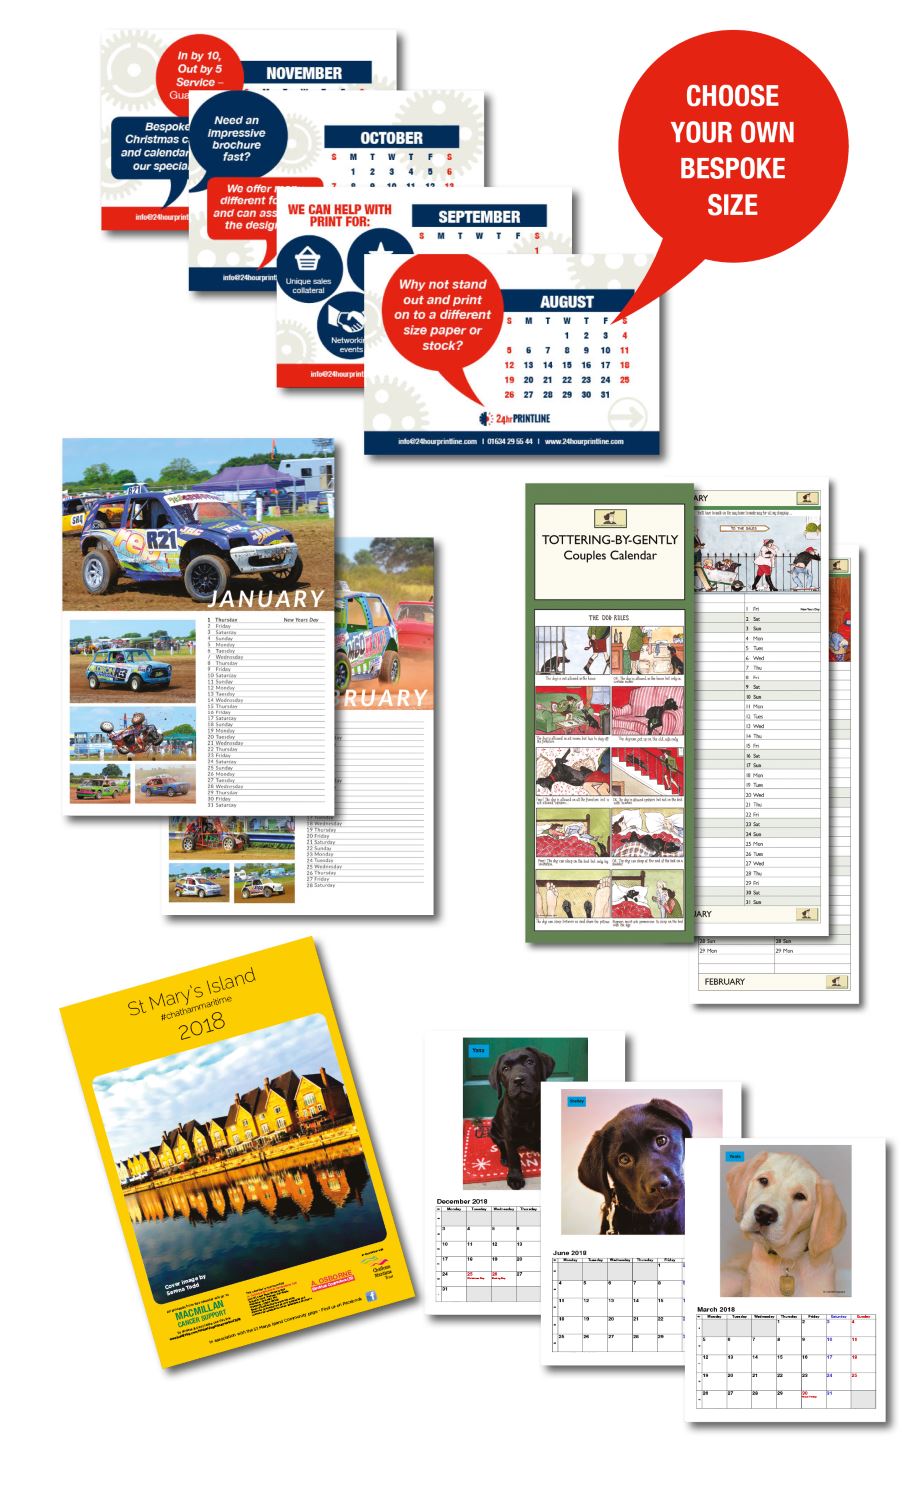 Options for our printed calendars